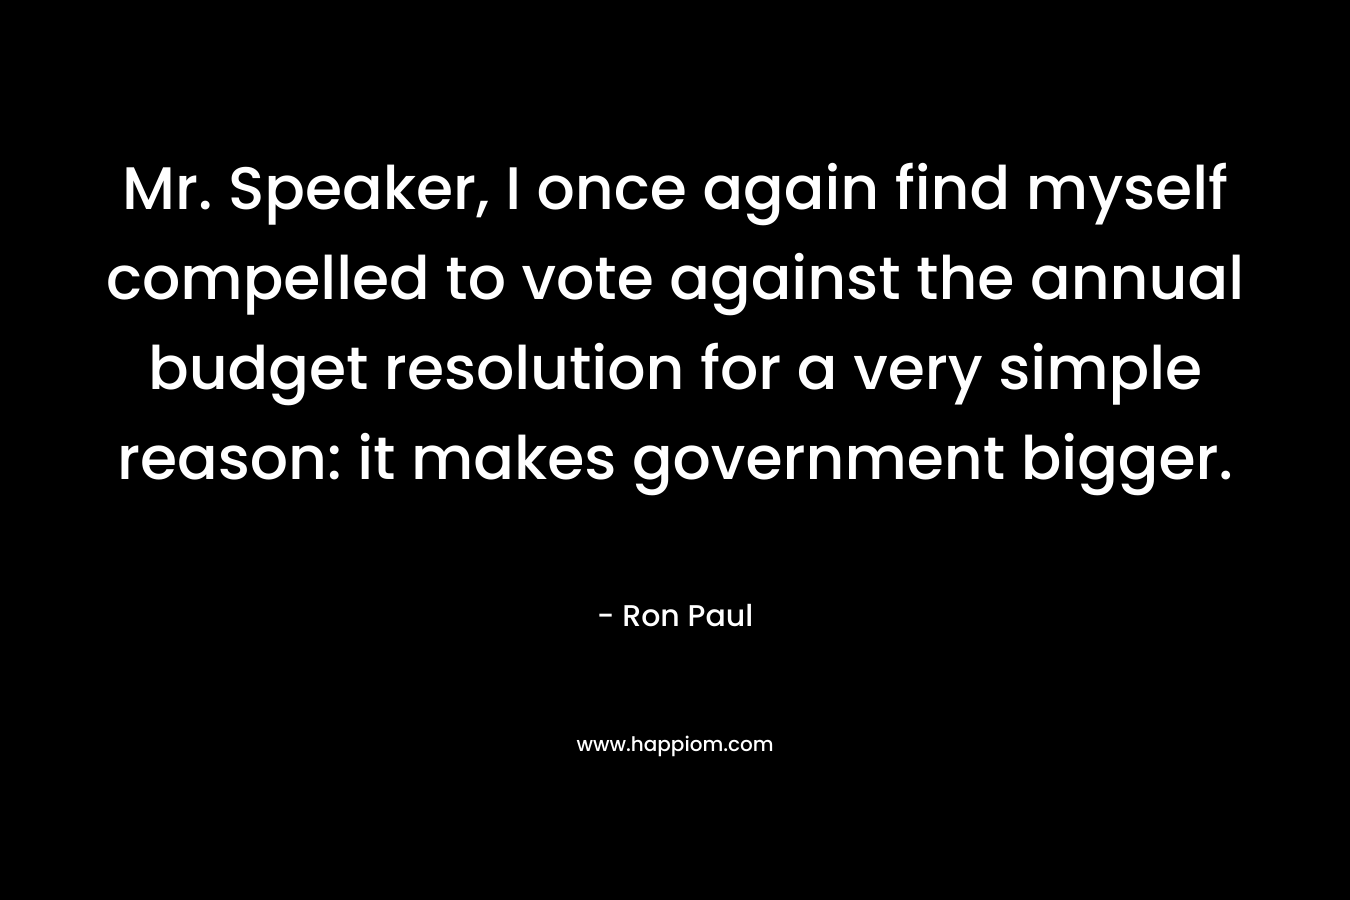 Mr. Speaker, I once again find myself compelled to vote against the annual budget resolution for a very simple reason: it makes government bigger. – Ron Paul